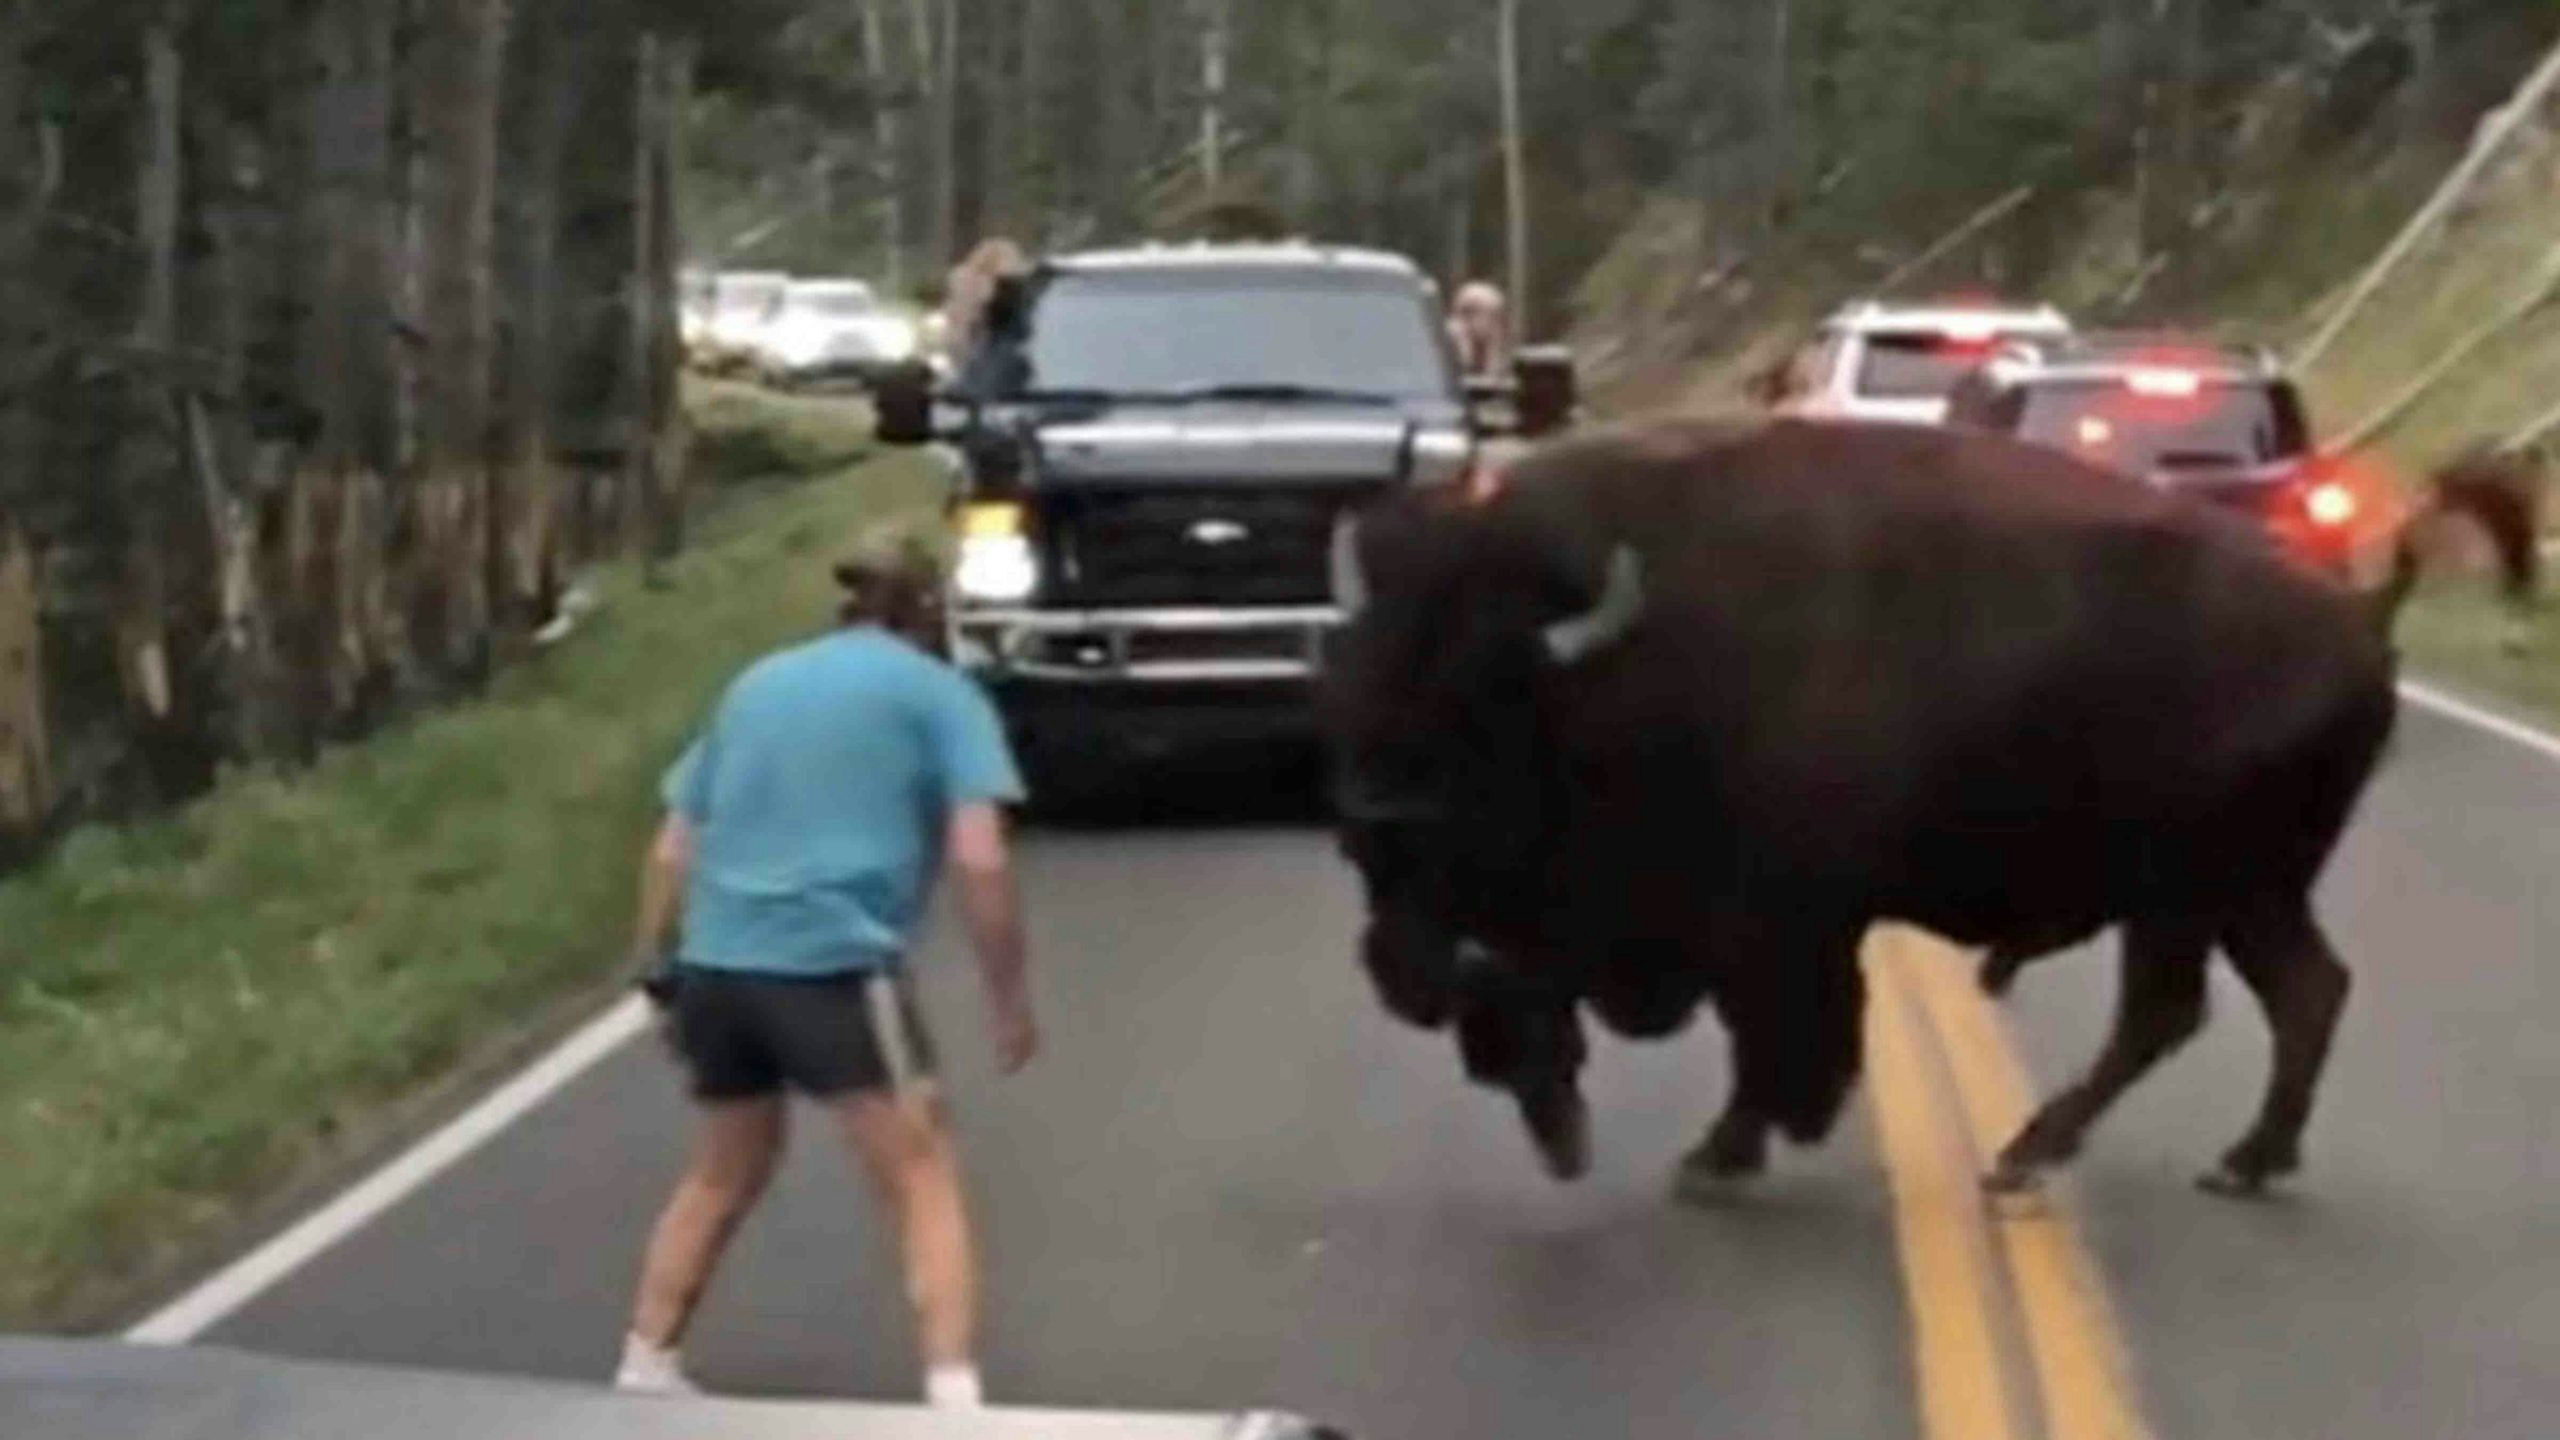 Bison and idiot in yellowstone 4 7 22 scaled